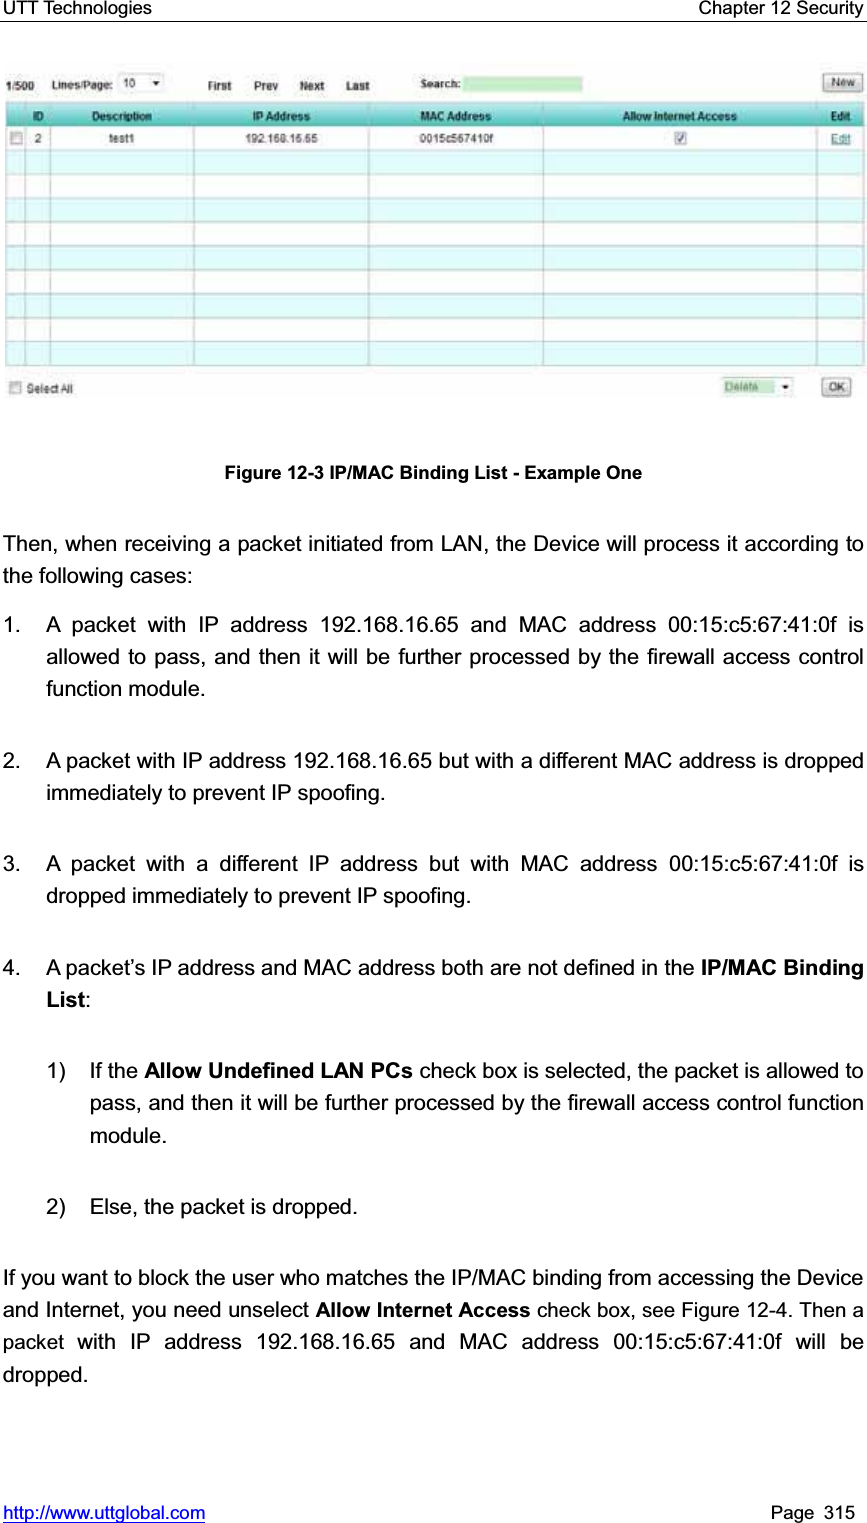 UTT Technologies    Chapter 12 Security   http://www.uttglobal.com Page 315 Figure 12-3 IP/MAC Binding List - Example One Then, when receiving a packet initiated from LAN, the Device will process it according to the following cases: 1.  A packet with IP address 192.168.16.65 and MAC address 00:15:c5:67:41:0f is allowed to pass, and then it will be further processed by the firewall access control function module.   2.  A packet with IP address 192.168.16.65 but with a different MAC address is dropped immediately to prevent IP spoofing.   3.  A packet with a different IP address but with MAC address 00:15:c5:67:41:0f is dropped immediately to prevent IP spoofing. 4. A packet¶s IP address and MAC address both are not defined in the IP/MAC Binding List:1)  If the Allow Undefined LAN PCs check box is selected, the packet is allowed to pass, and then it will be further processed by the firewall access control function module. 2)    Else, the packet is dropped. If you want to block the user who matches the IP/MAC binding from accessing the Device and Internet, you need unselect Allow Internet Access check box, see Figure 12-4. Then a packet  with IP address 192.168.16.65 and MAC address 00:15:c5:67:41:0f will be dropped. 